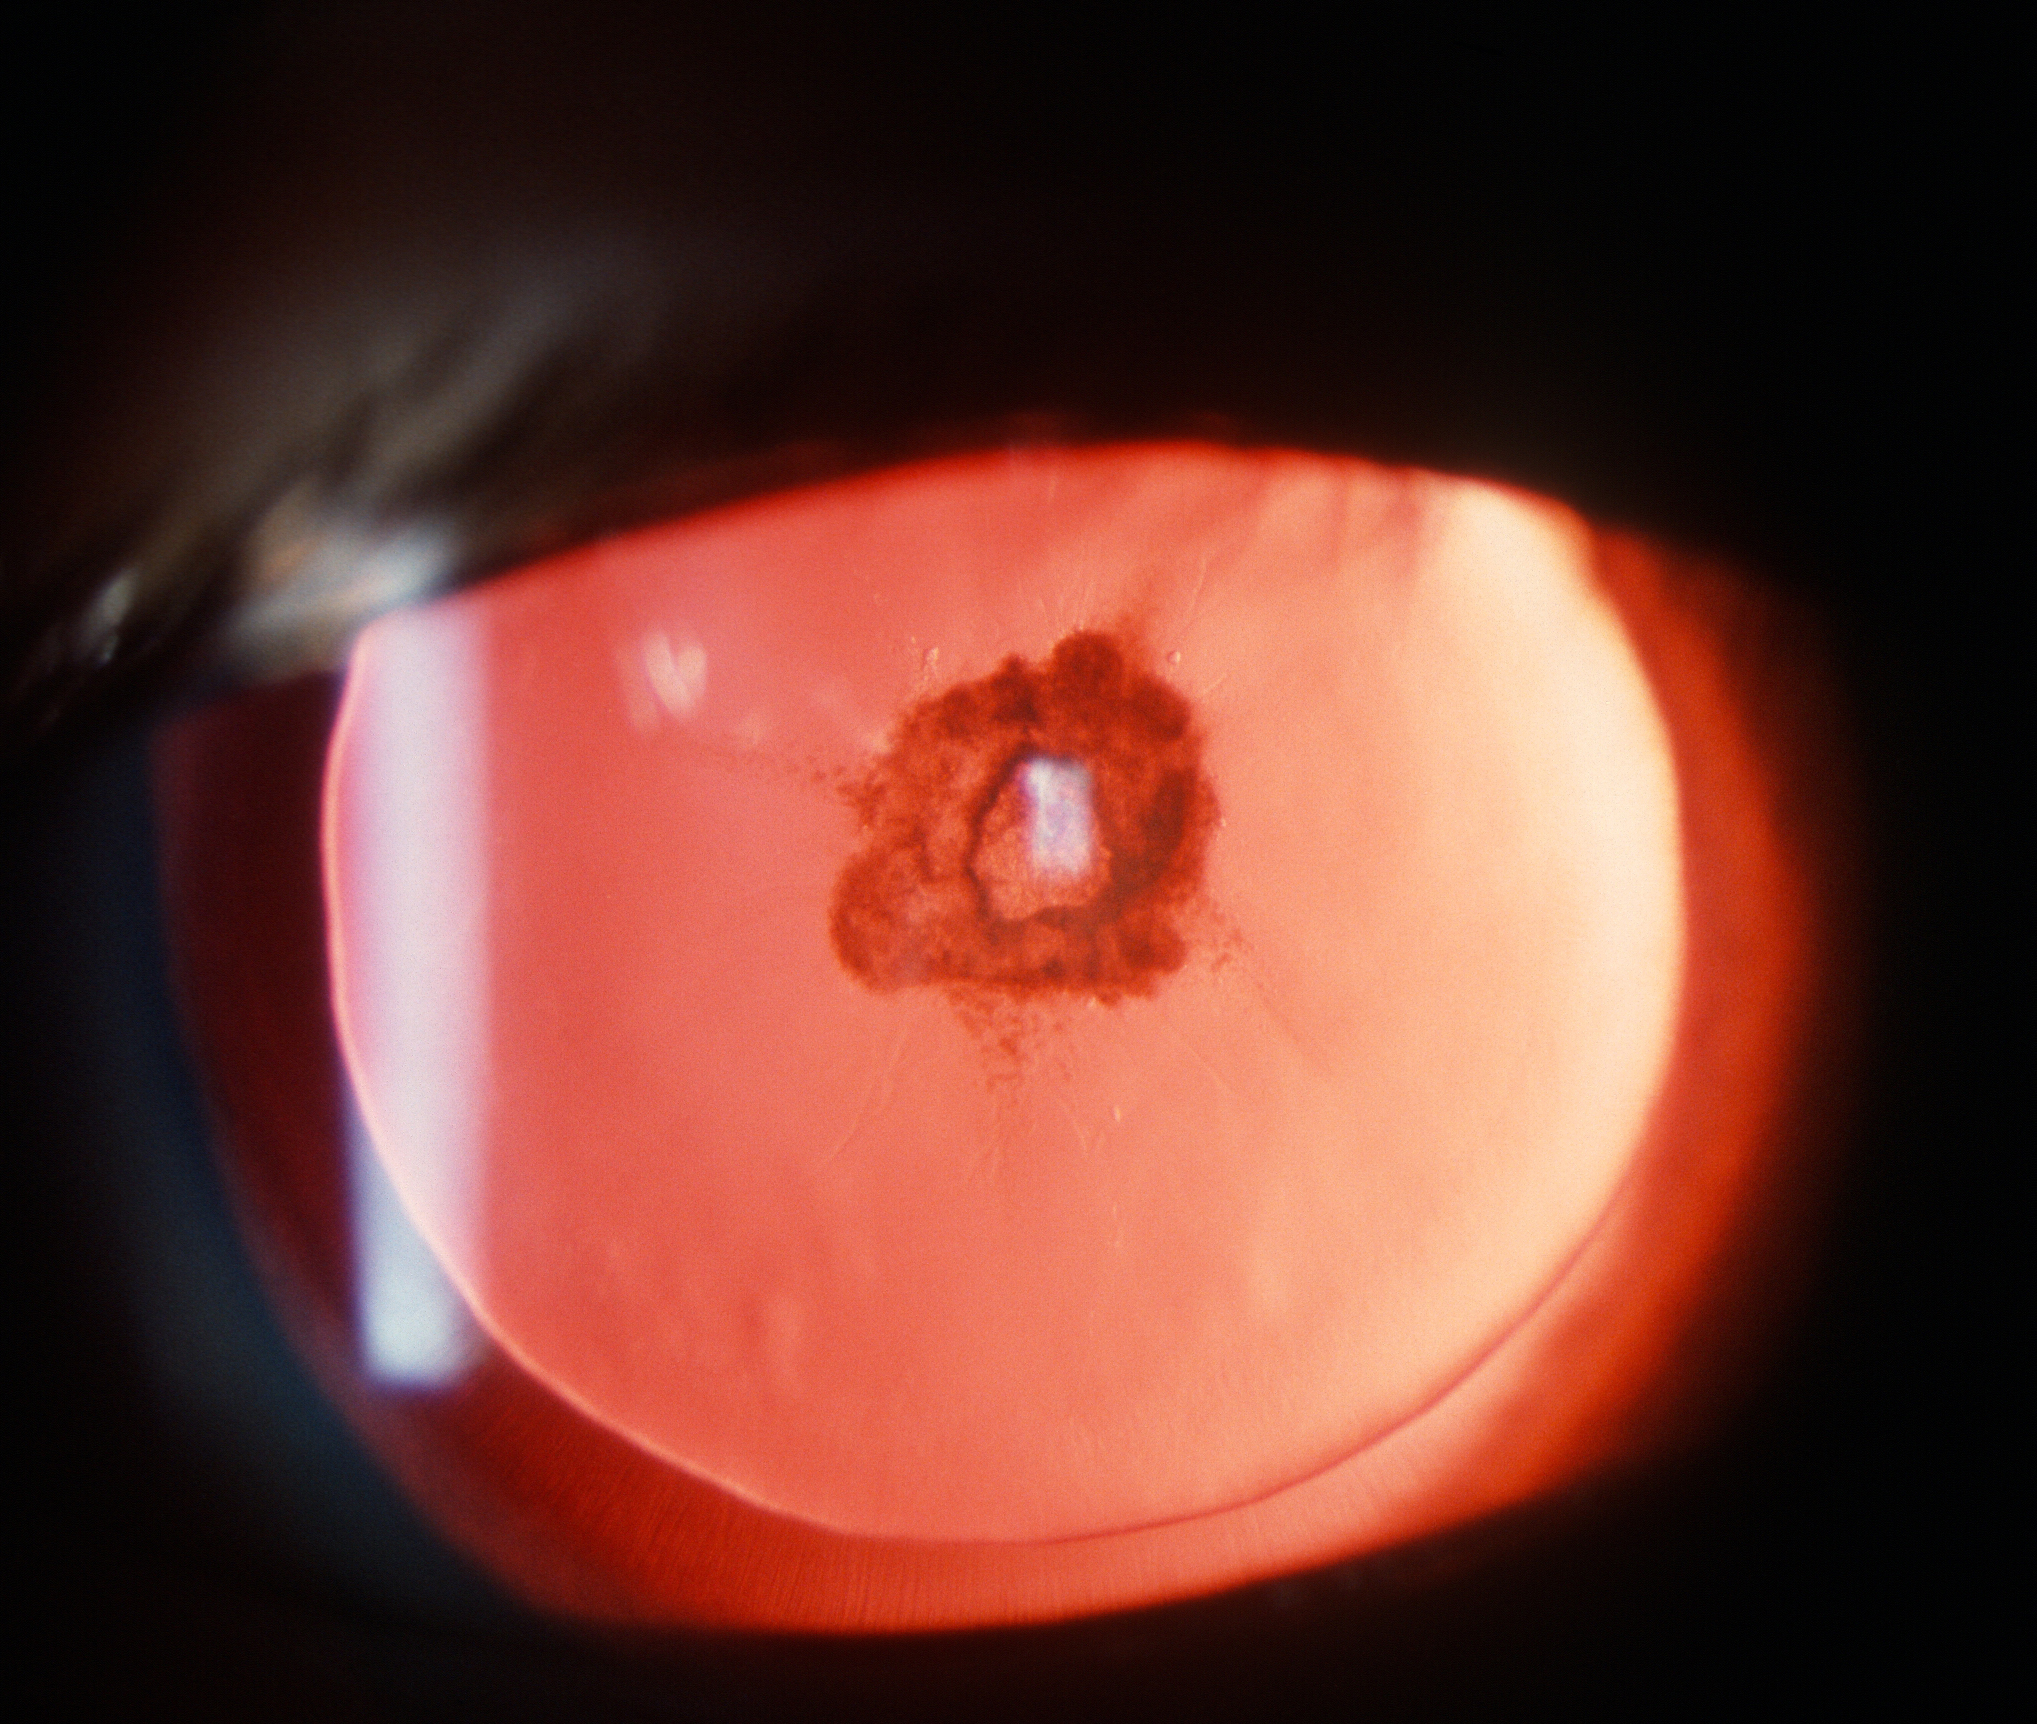 Posterior subcapsular cataract seen after chronic steroid use